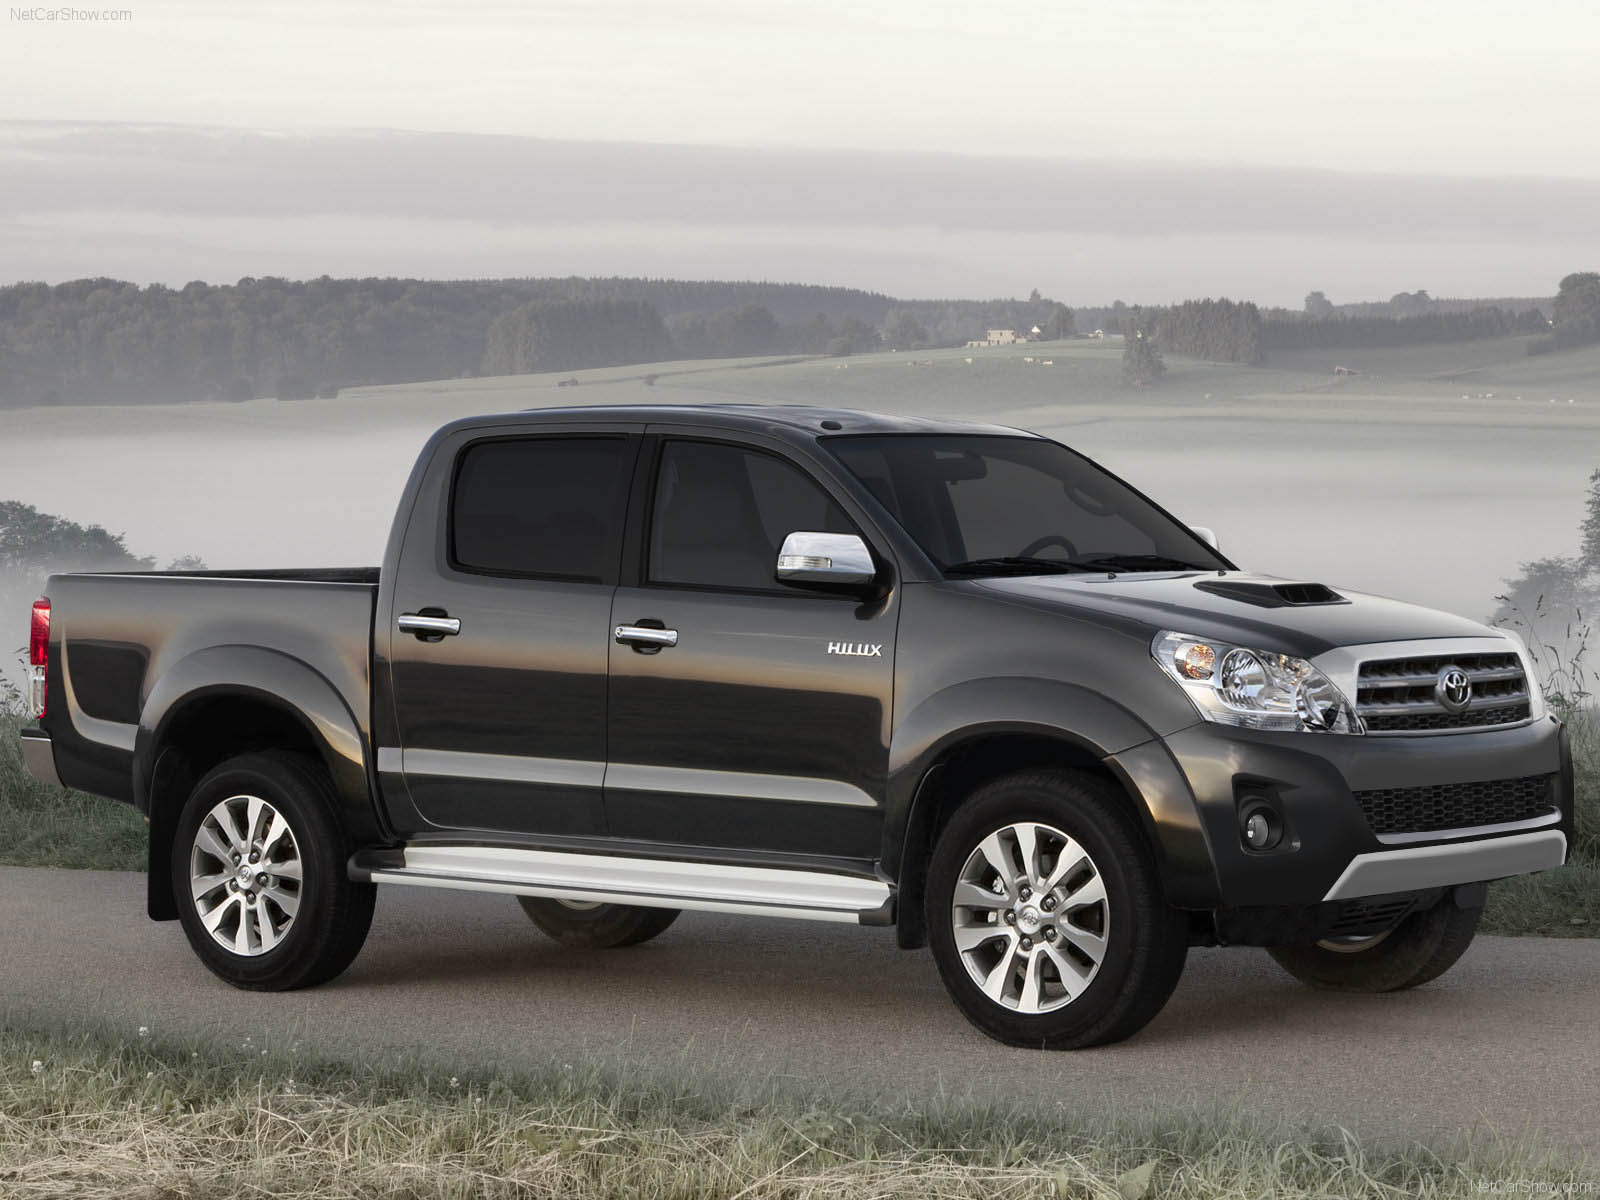 Toyota Hilux 2012 Pickup Truck Review with Wallpapers Auto Car